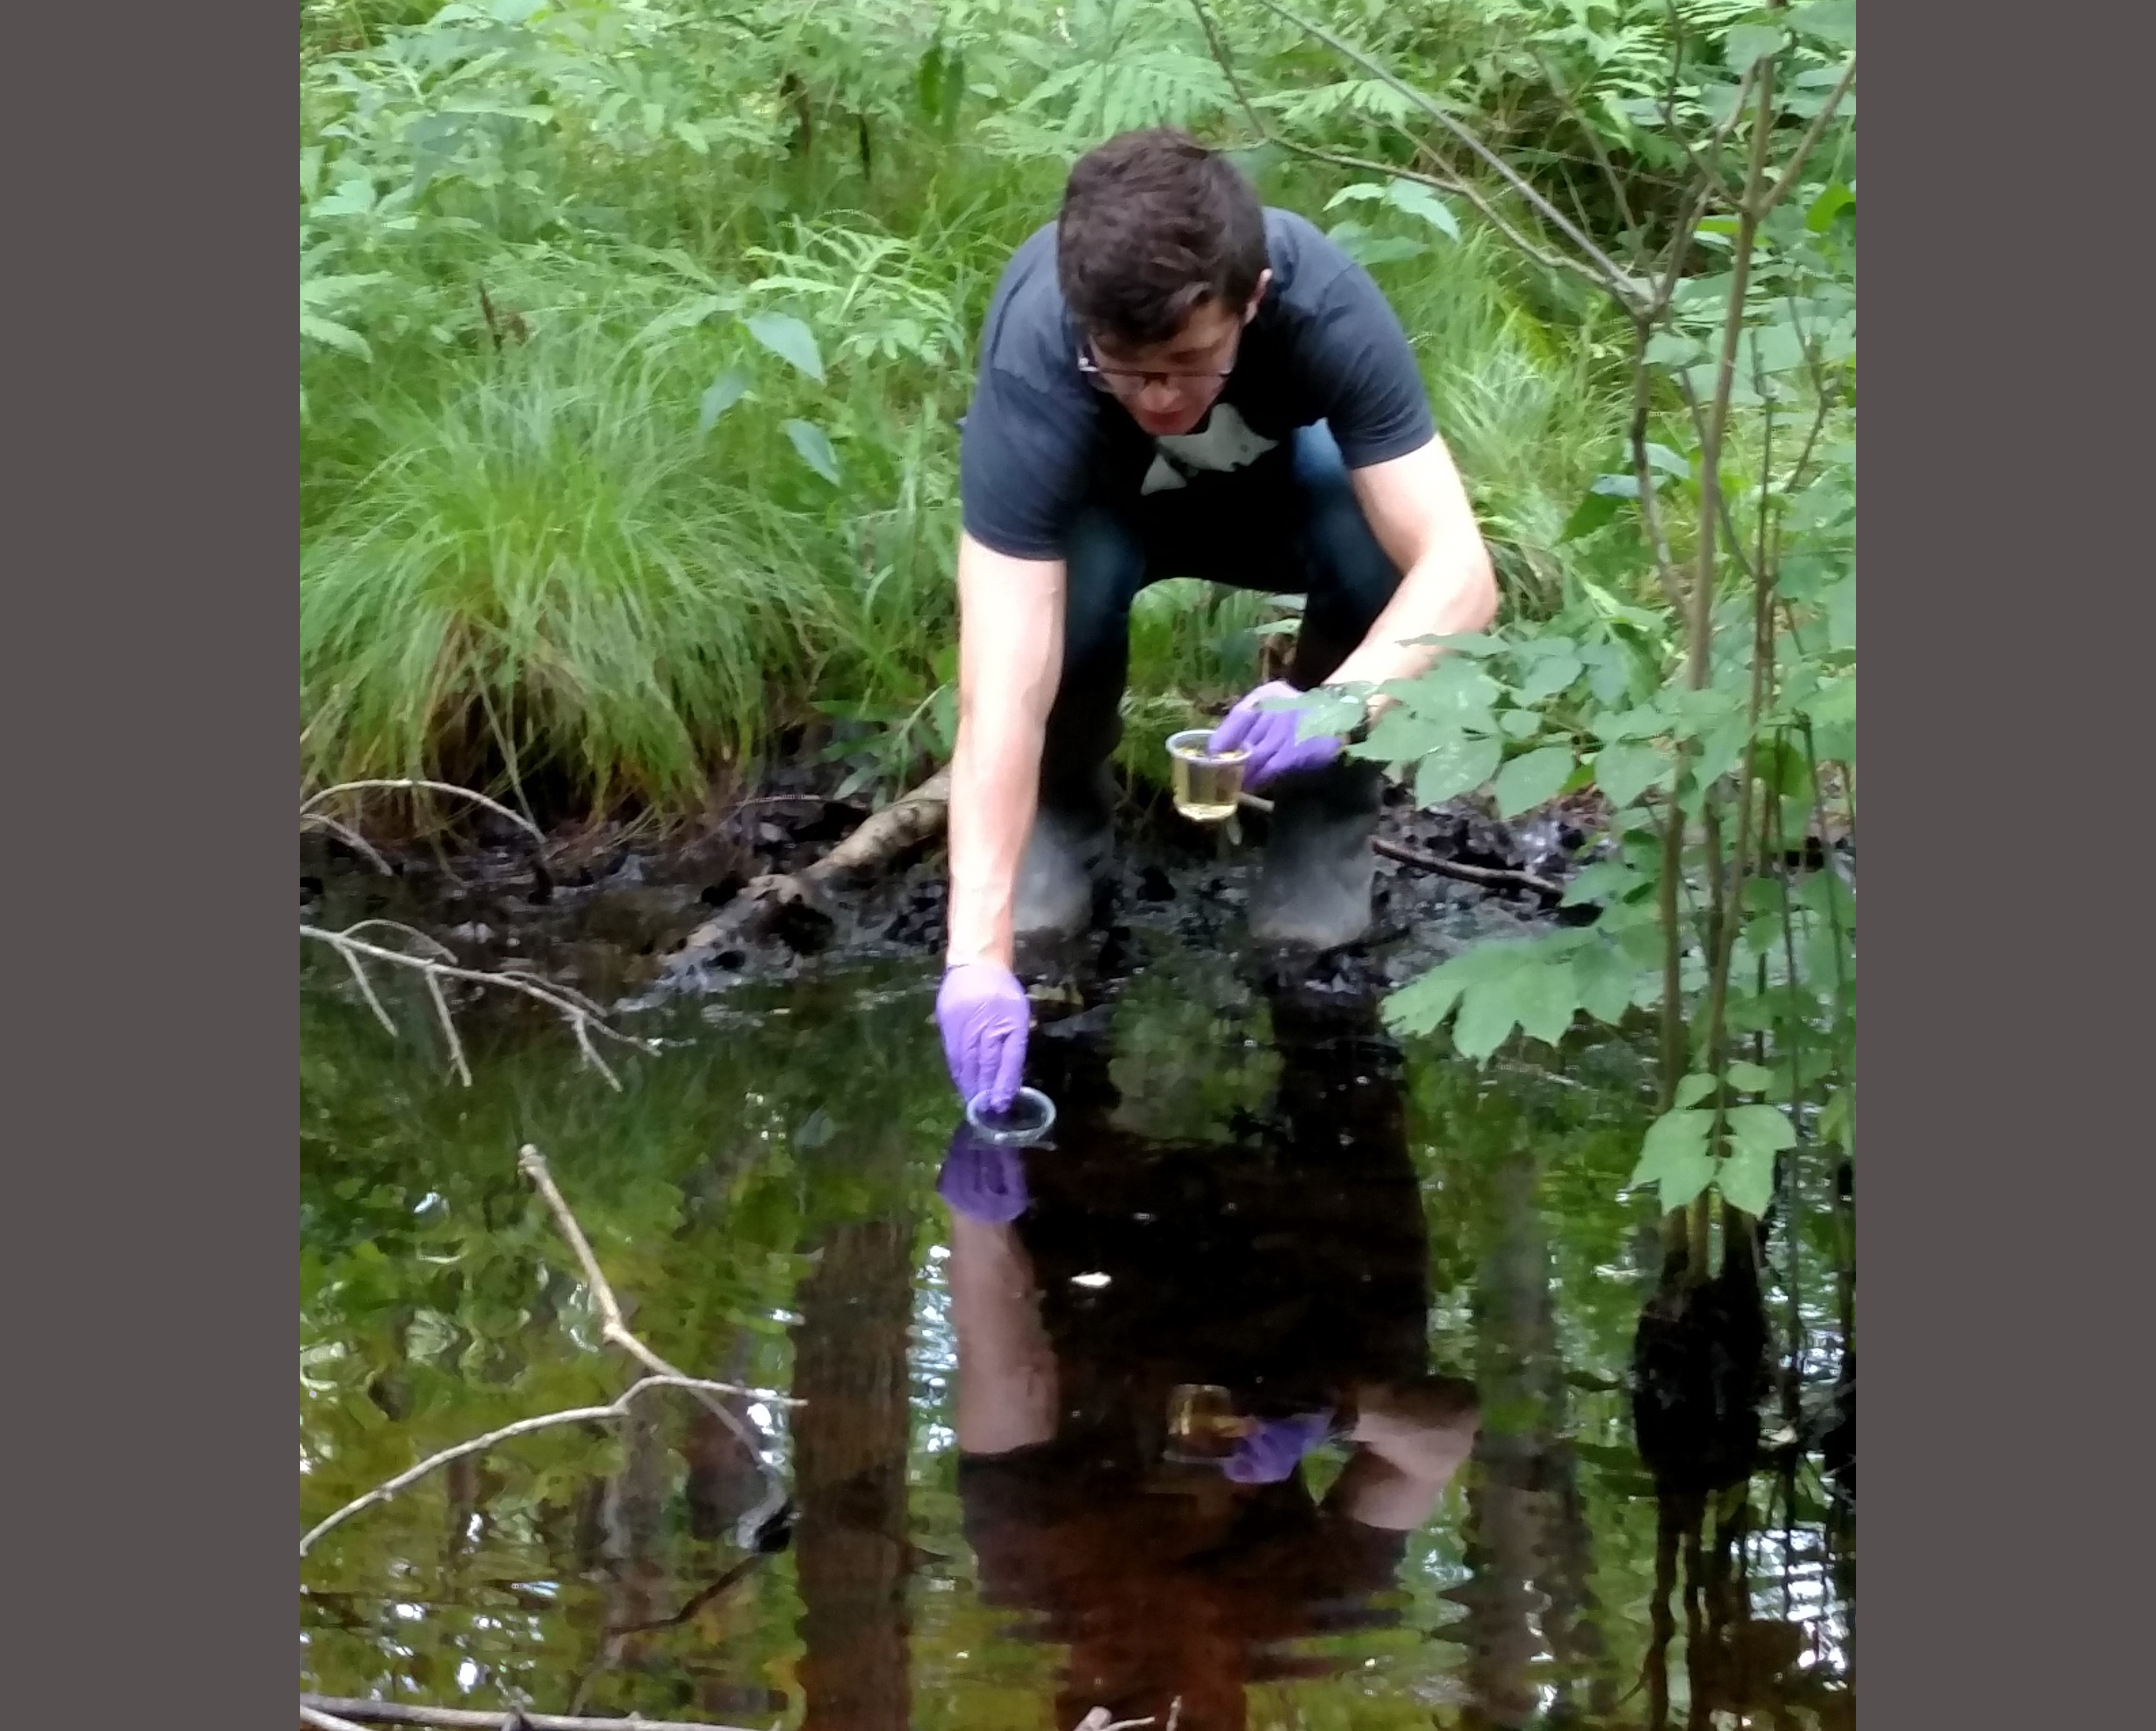 student collecting water samples